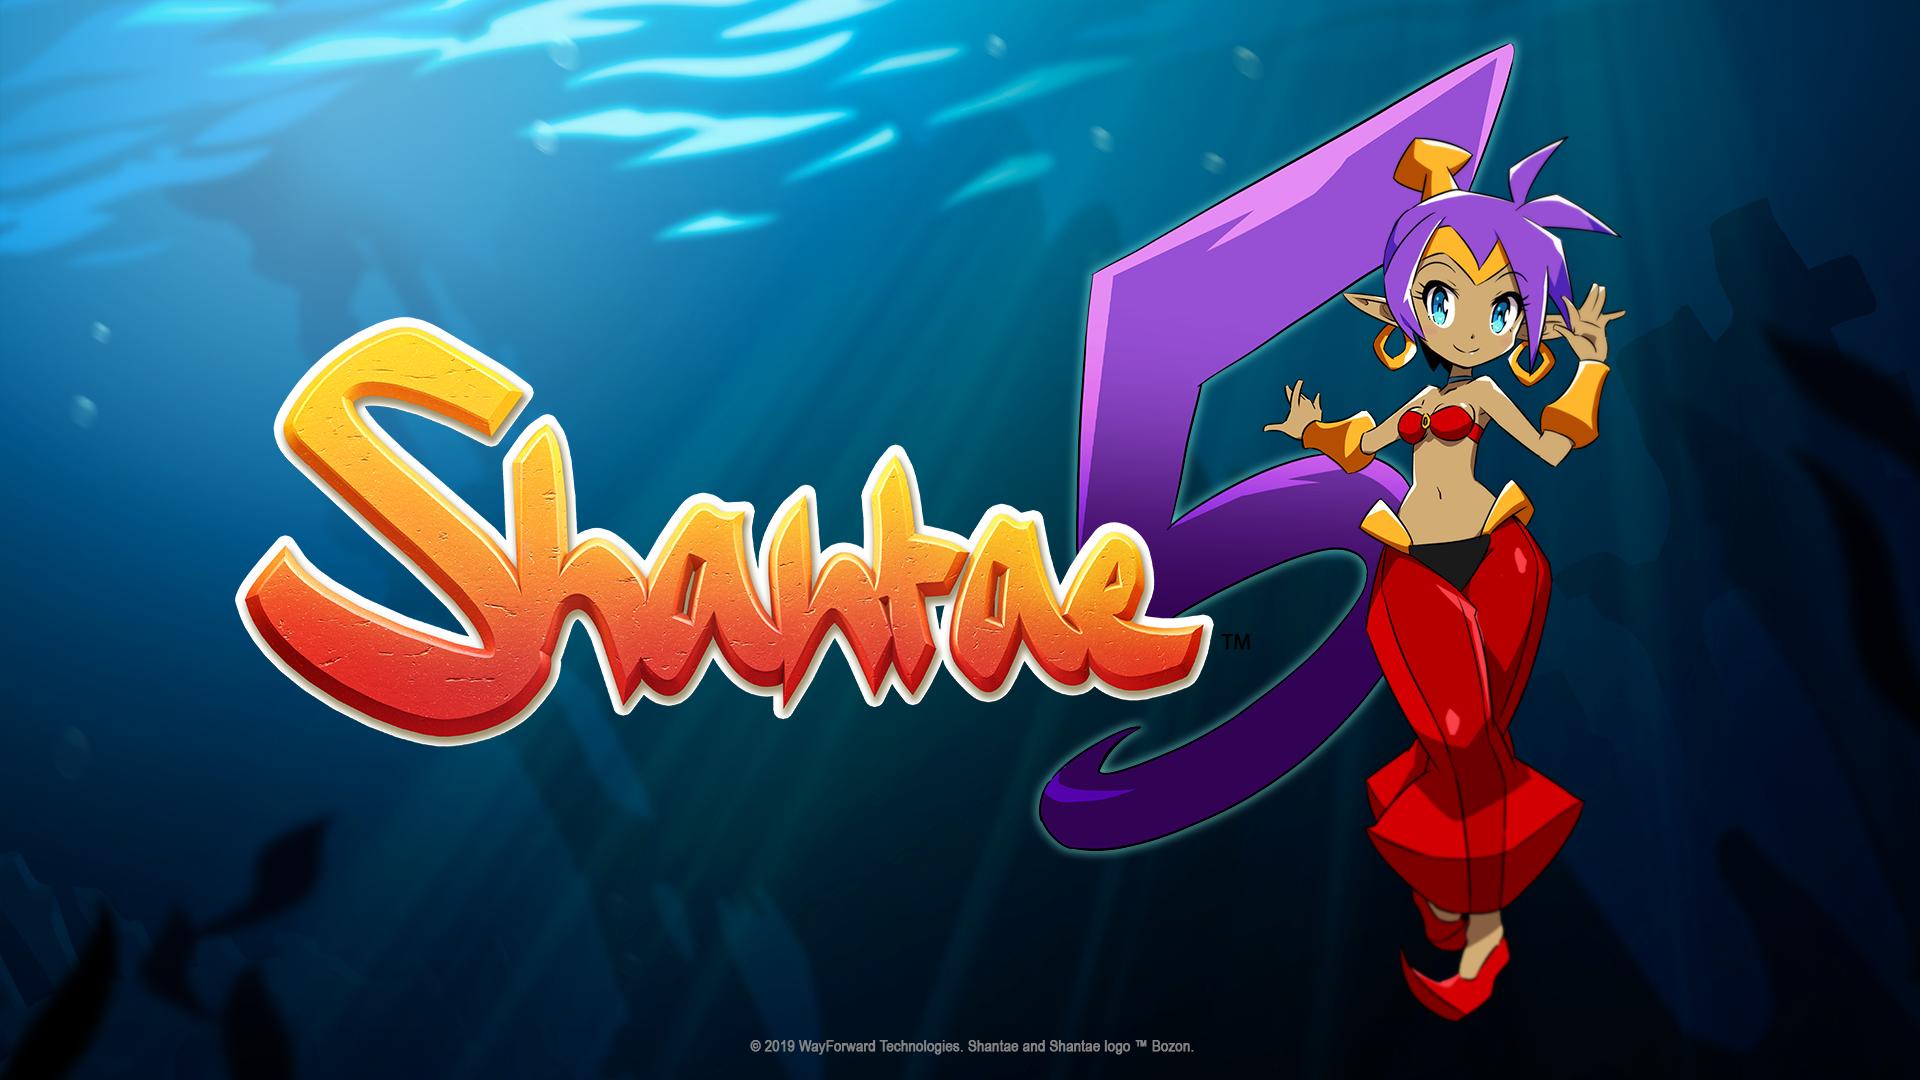 Shantae 5 Announced for Nintendo Switch in 2019